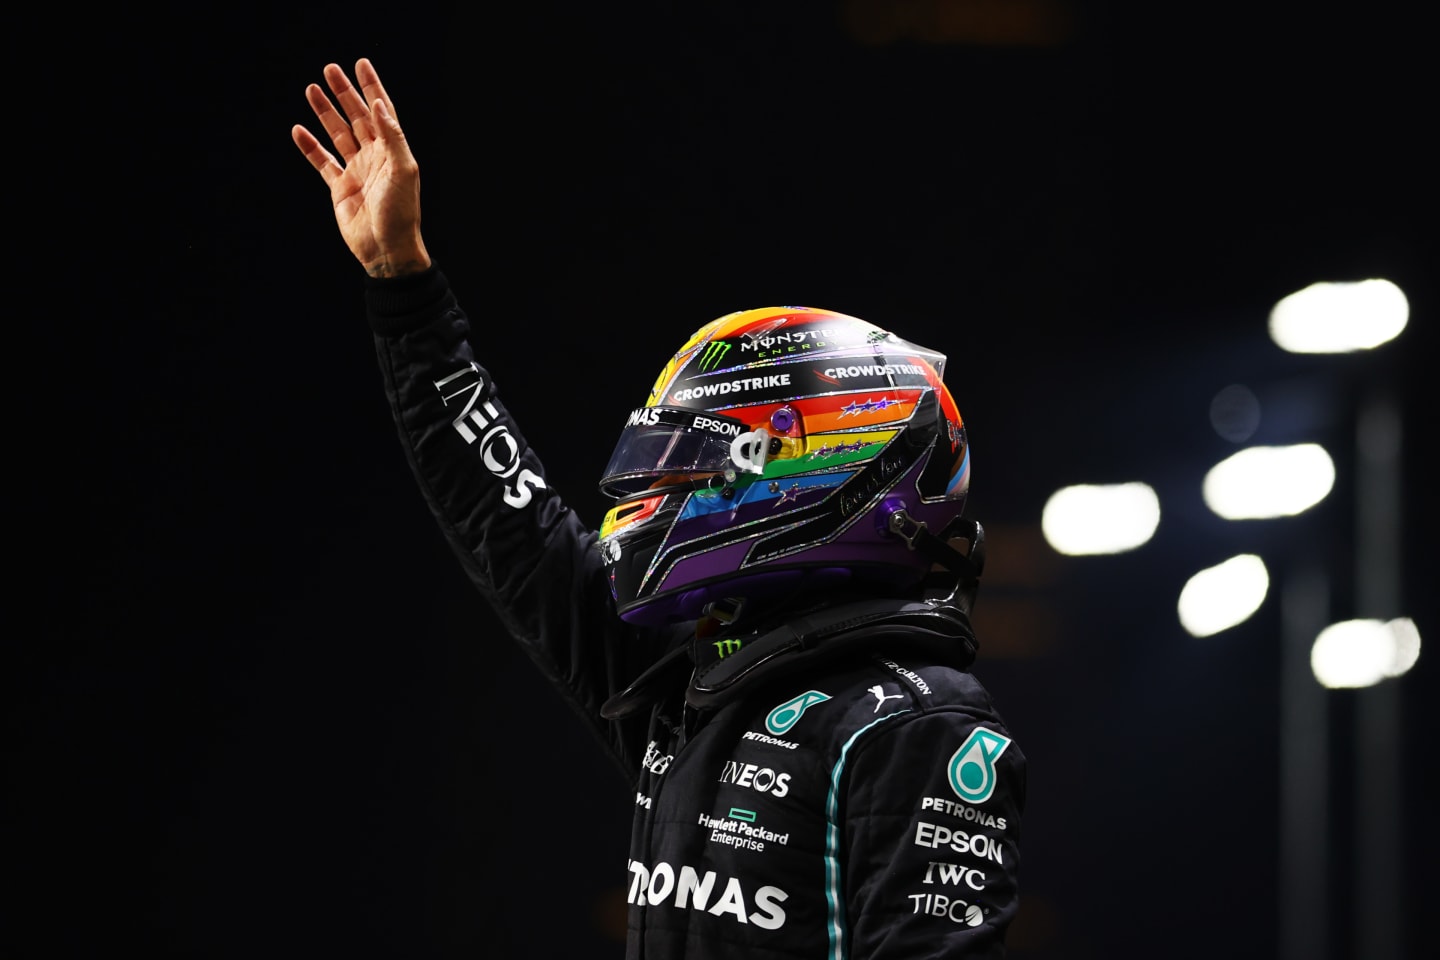 JEDDAH, SAUDI ARABIA - DECEMBER 04: Pole position qualifier Lewis Hamilton of Great Britain and Mercedes GP celebrates in parc ferme during qualifying ahead of the F1 Grand Prix of Saudi Arabia at Jeddah Corniche Circuit on December 04, 2021 in Jeddah, Saudi Arabia. (Photo by Bryn Lennon - Formula 1/Formula 1 via Getty Images)